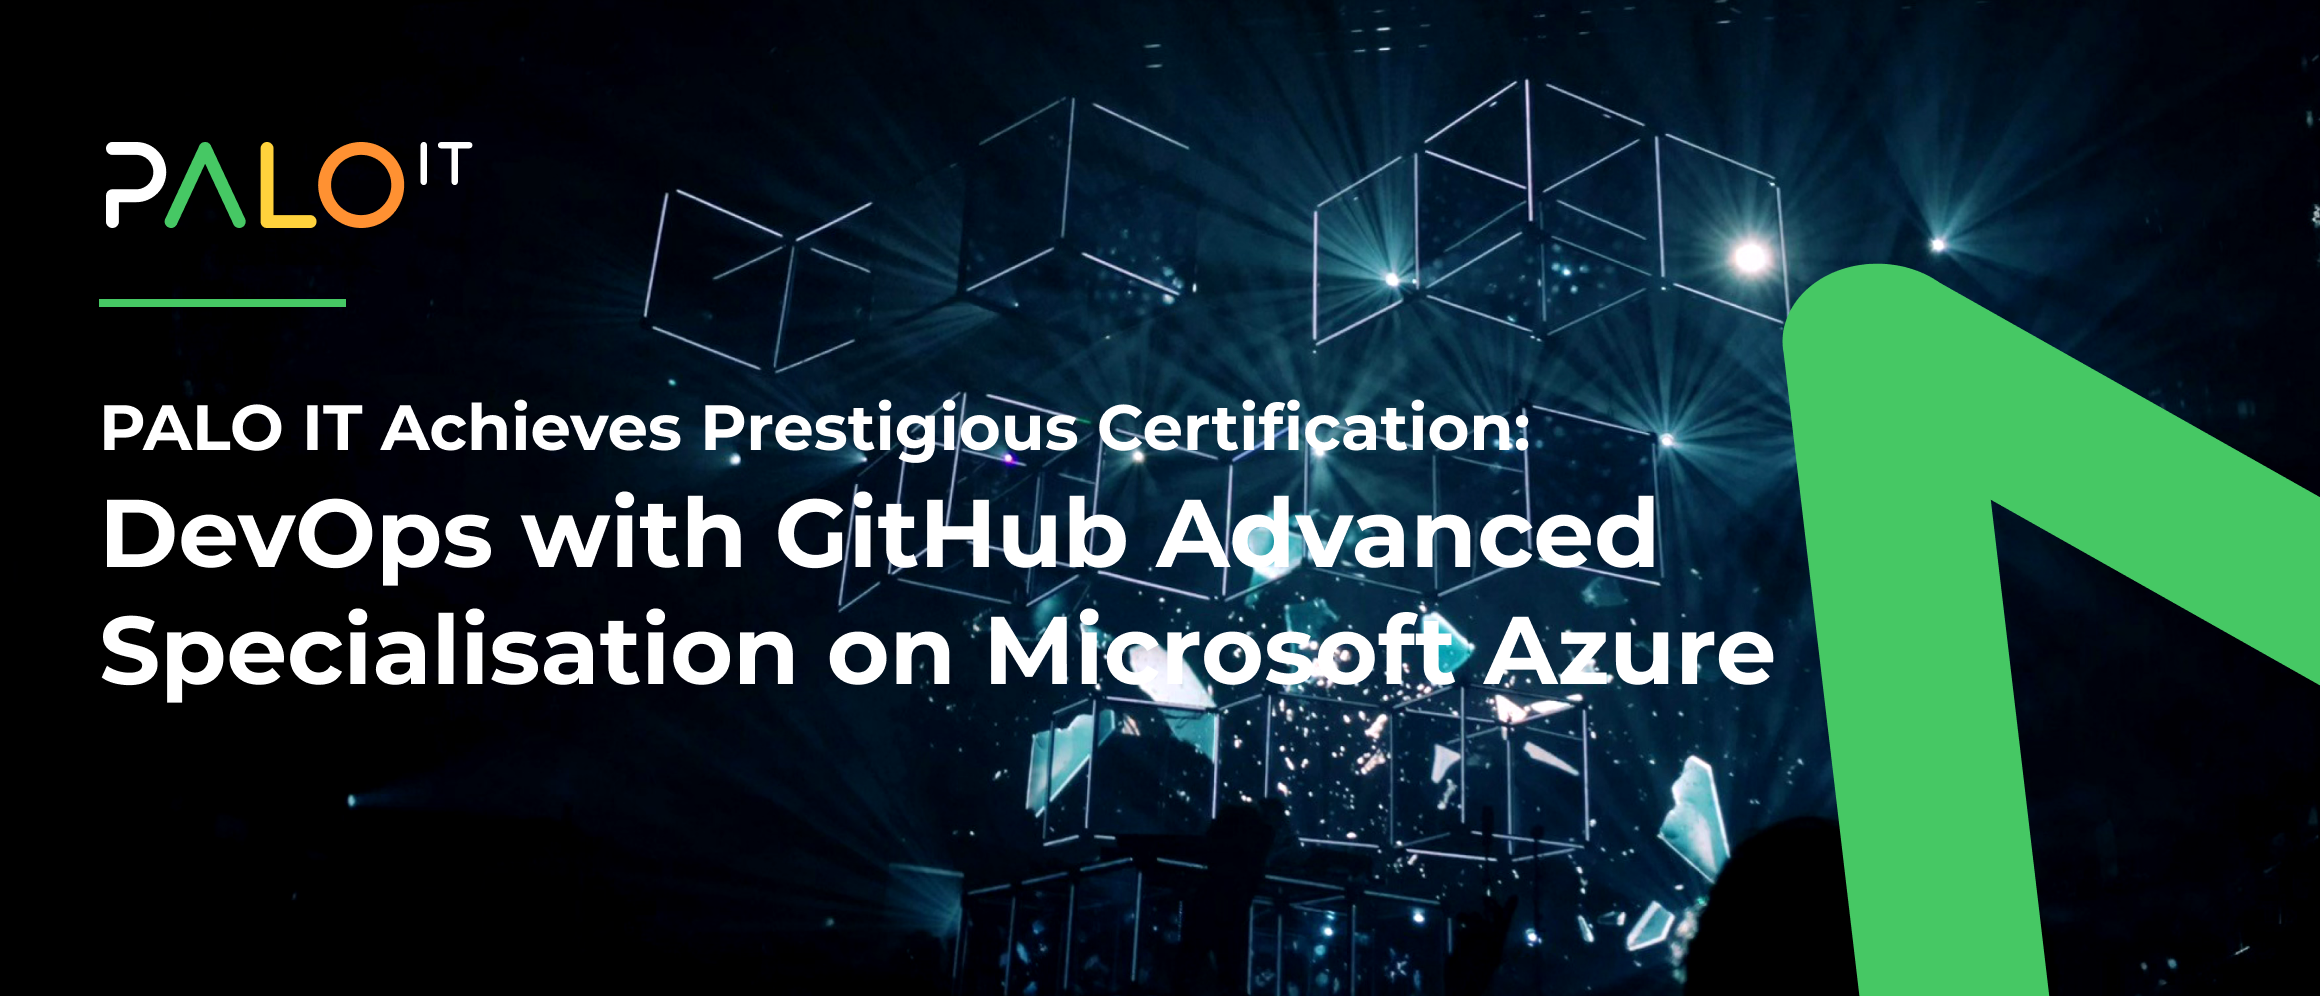 PALO IT Achieves DevOps with GitHub Advanced Specialisation on Microsoft Azure Certification